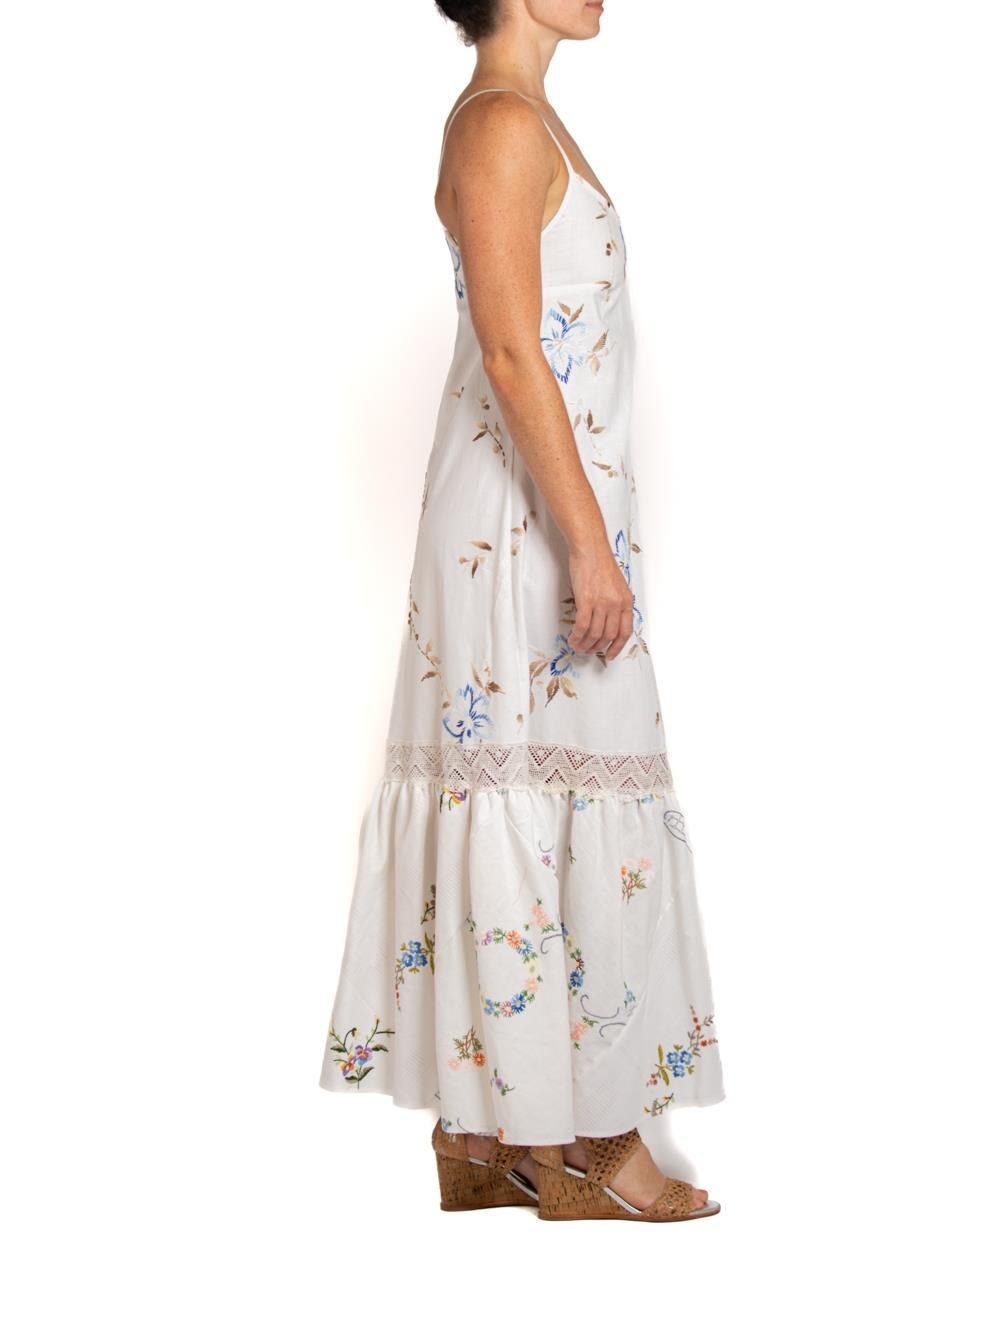 Women's MORPHEW COLLECTION White & Blue Hand Embroidered Fabric From France Dress For Sale